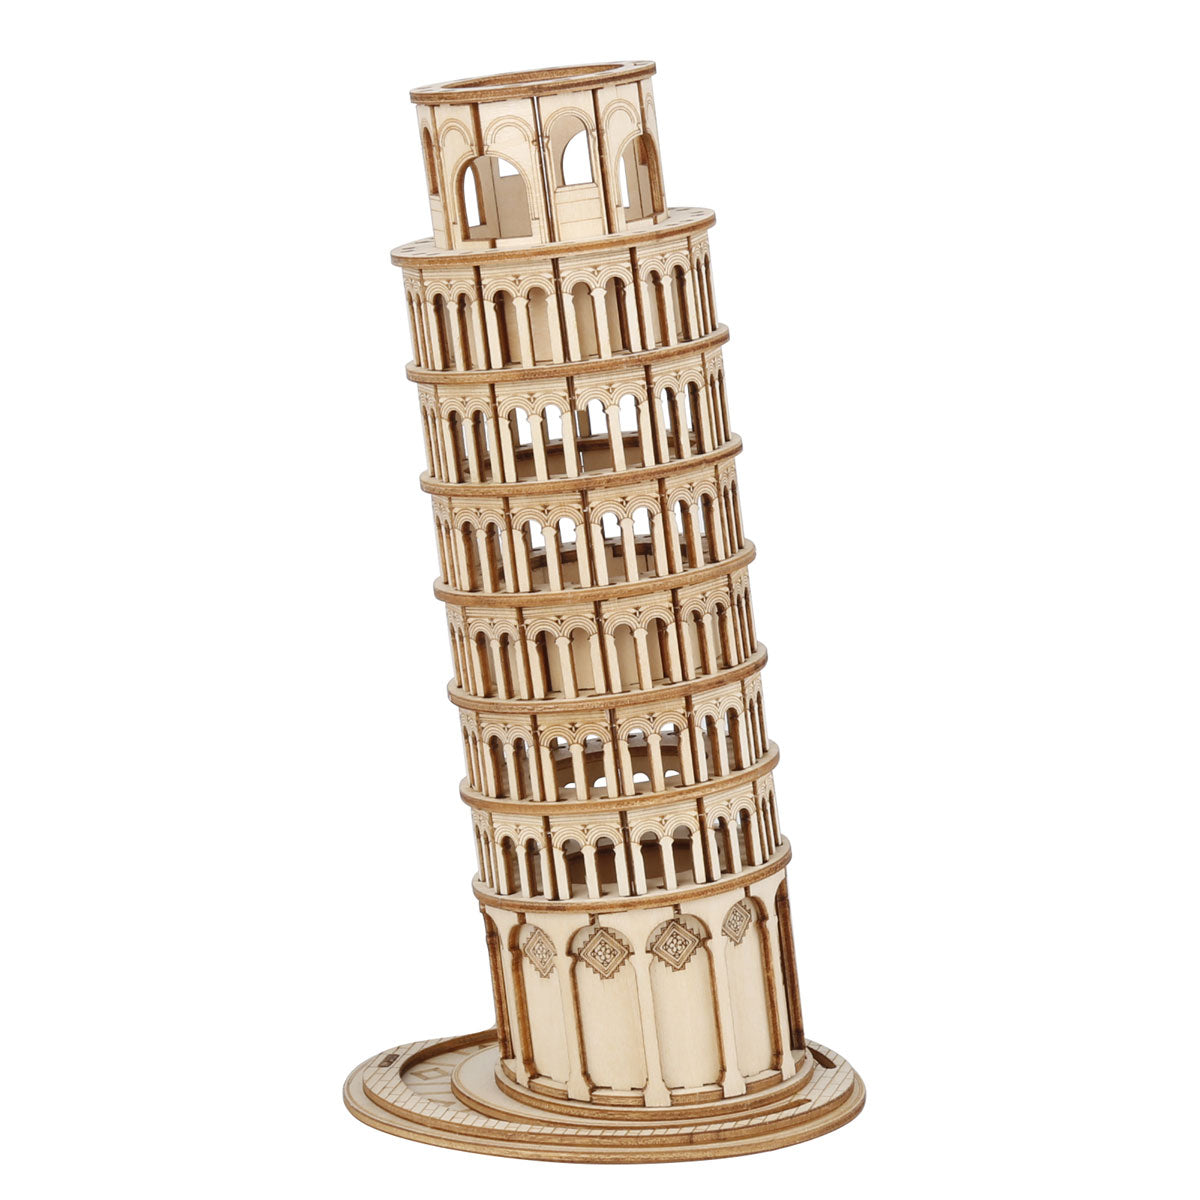 Robotime - Classic 3D Wood Puzzles; Leaning Tower of Pisa